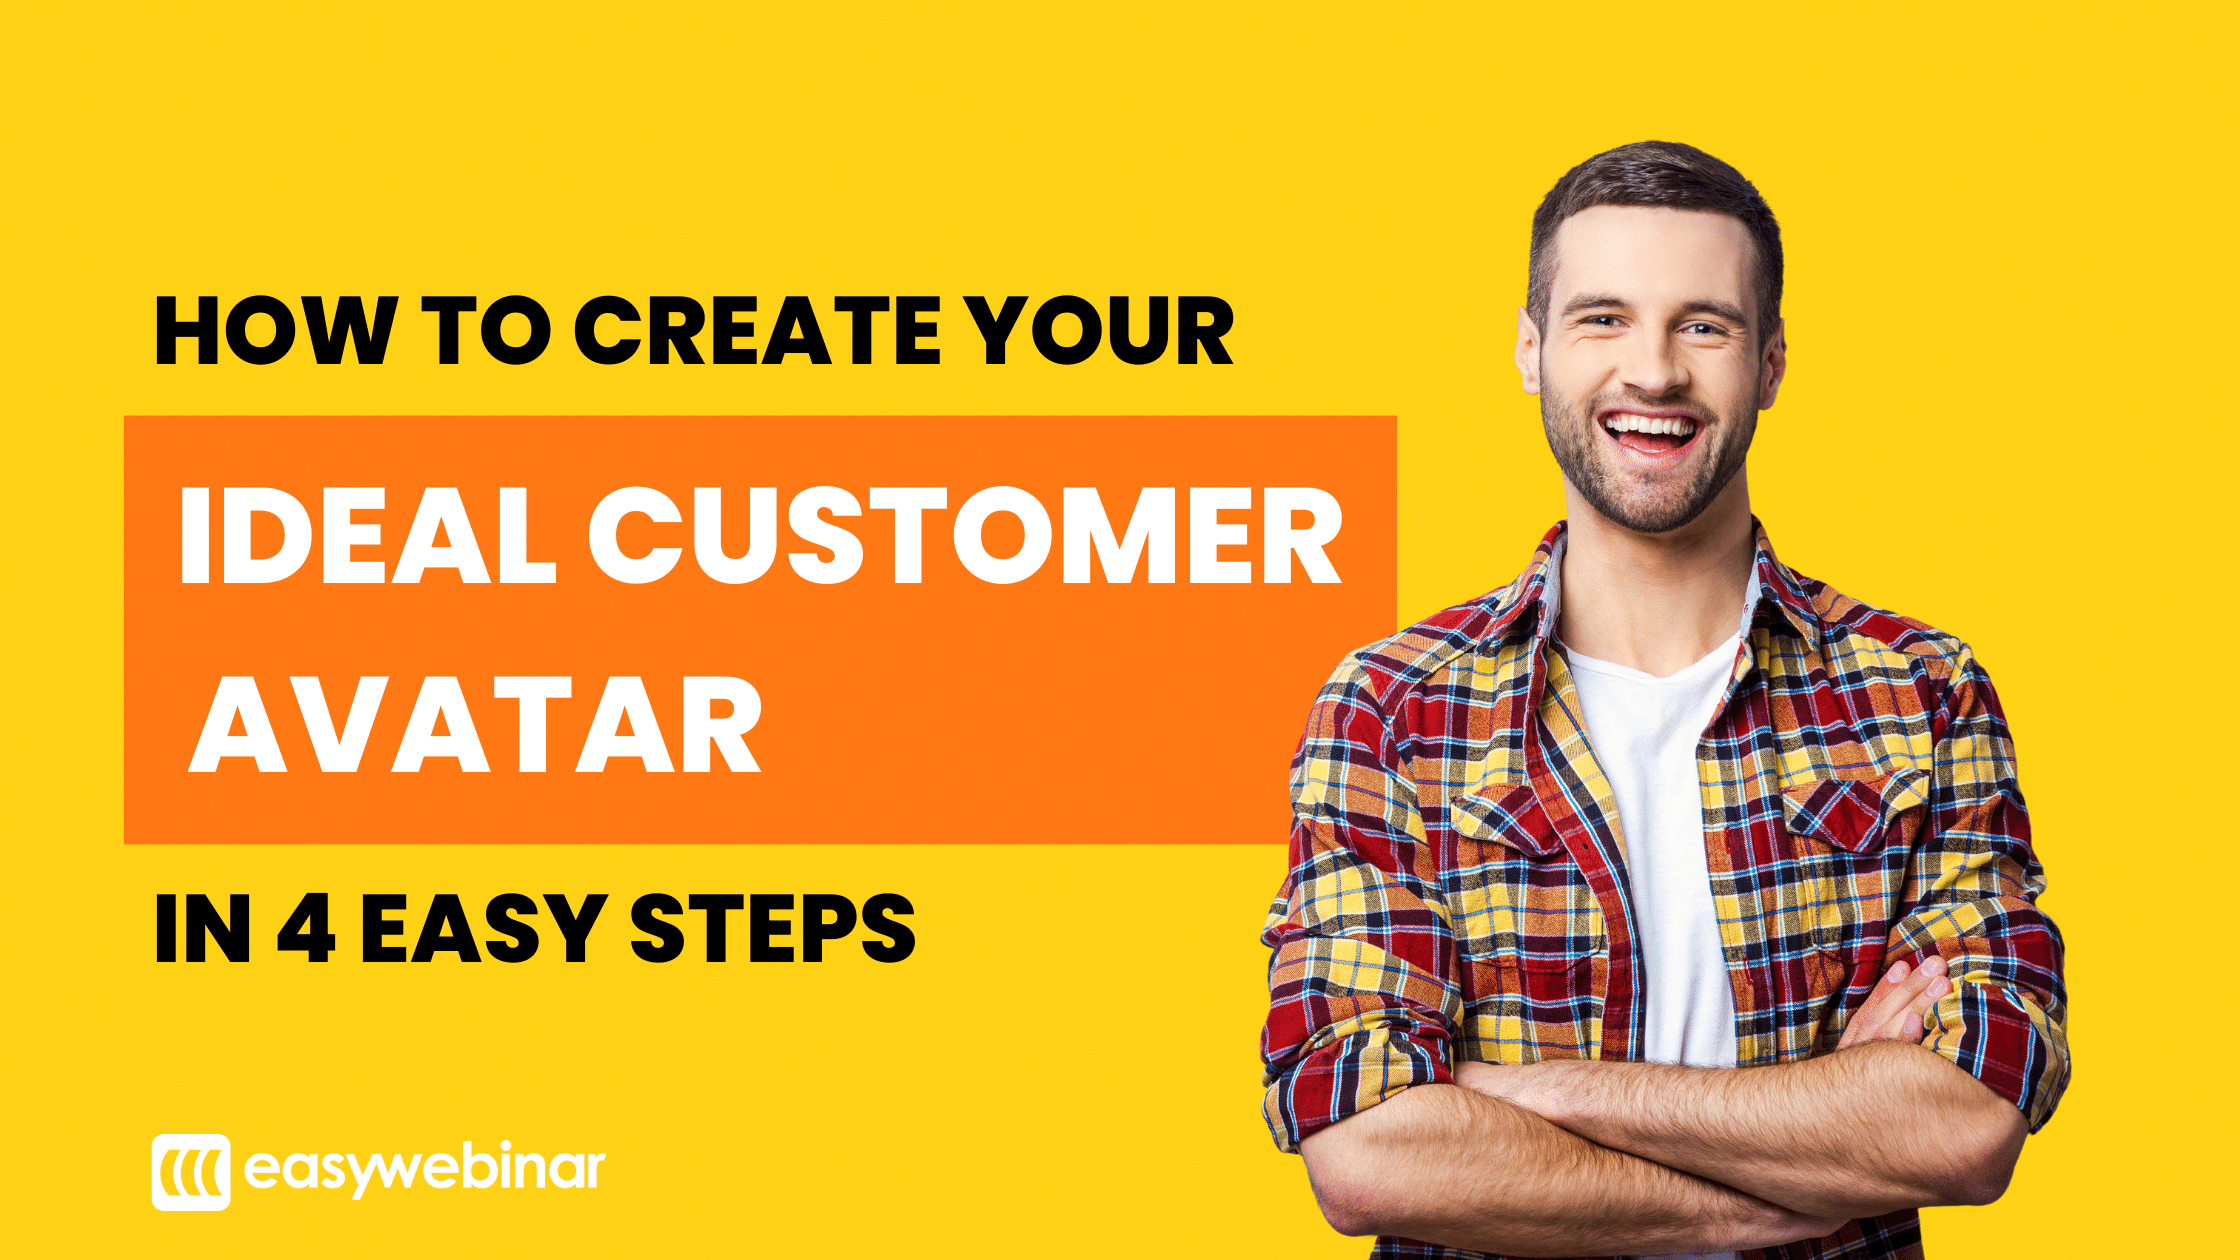 How to create your ideal customer avatar in 4 easy steps, presented by EasyWebinar